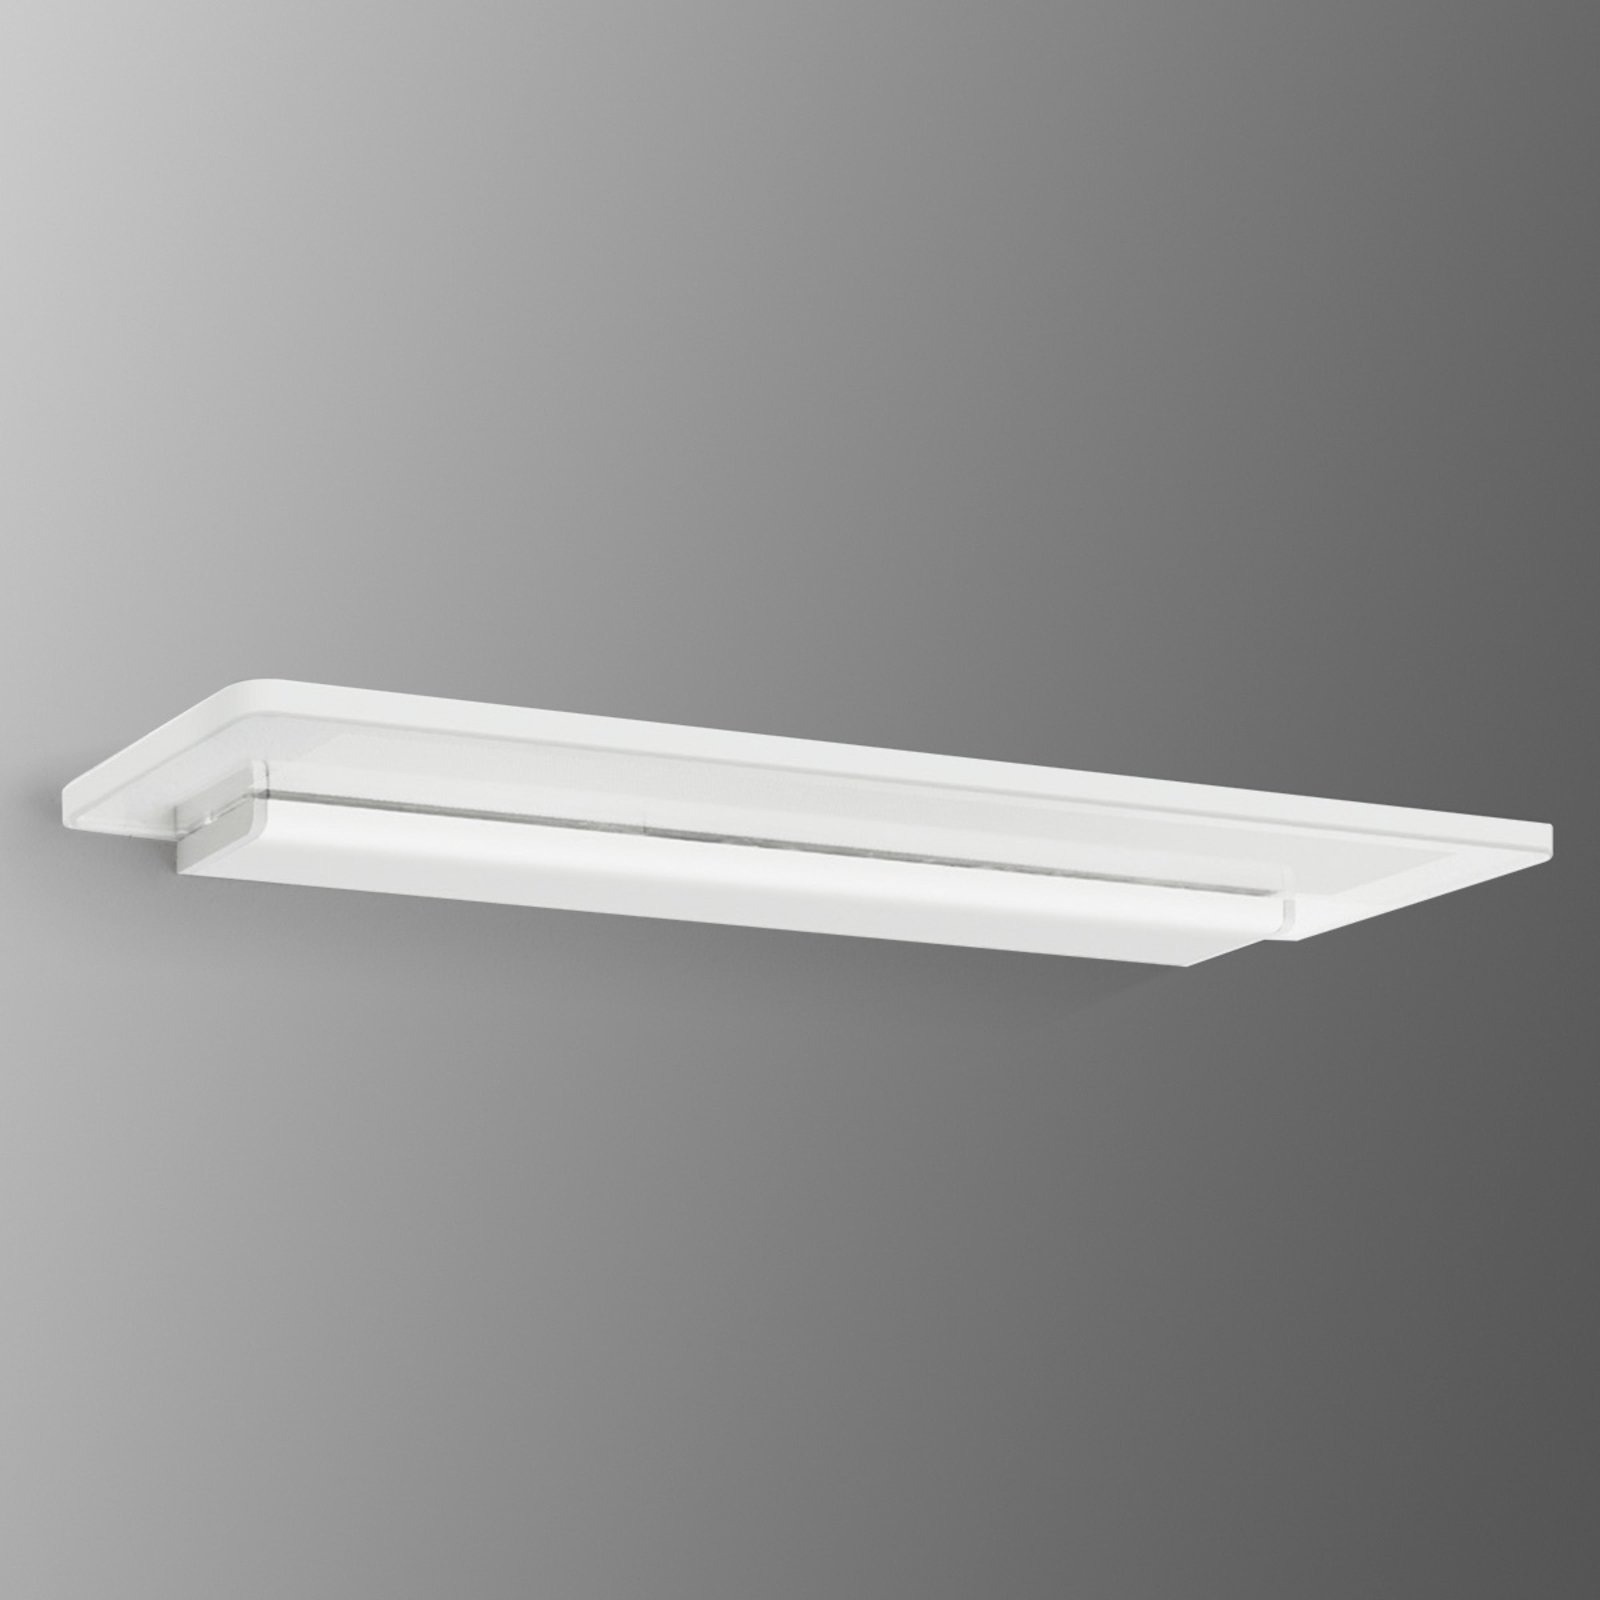 Skinny - an LED wall light for bathrooms too